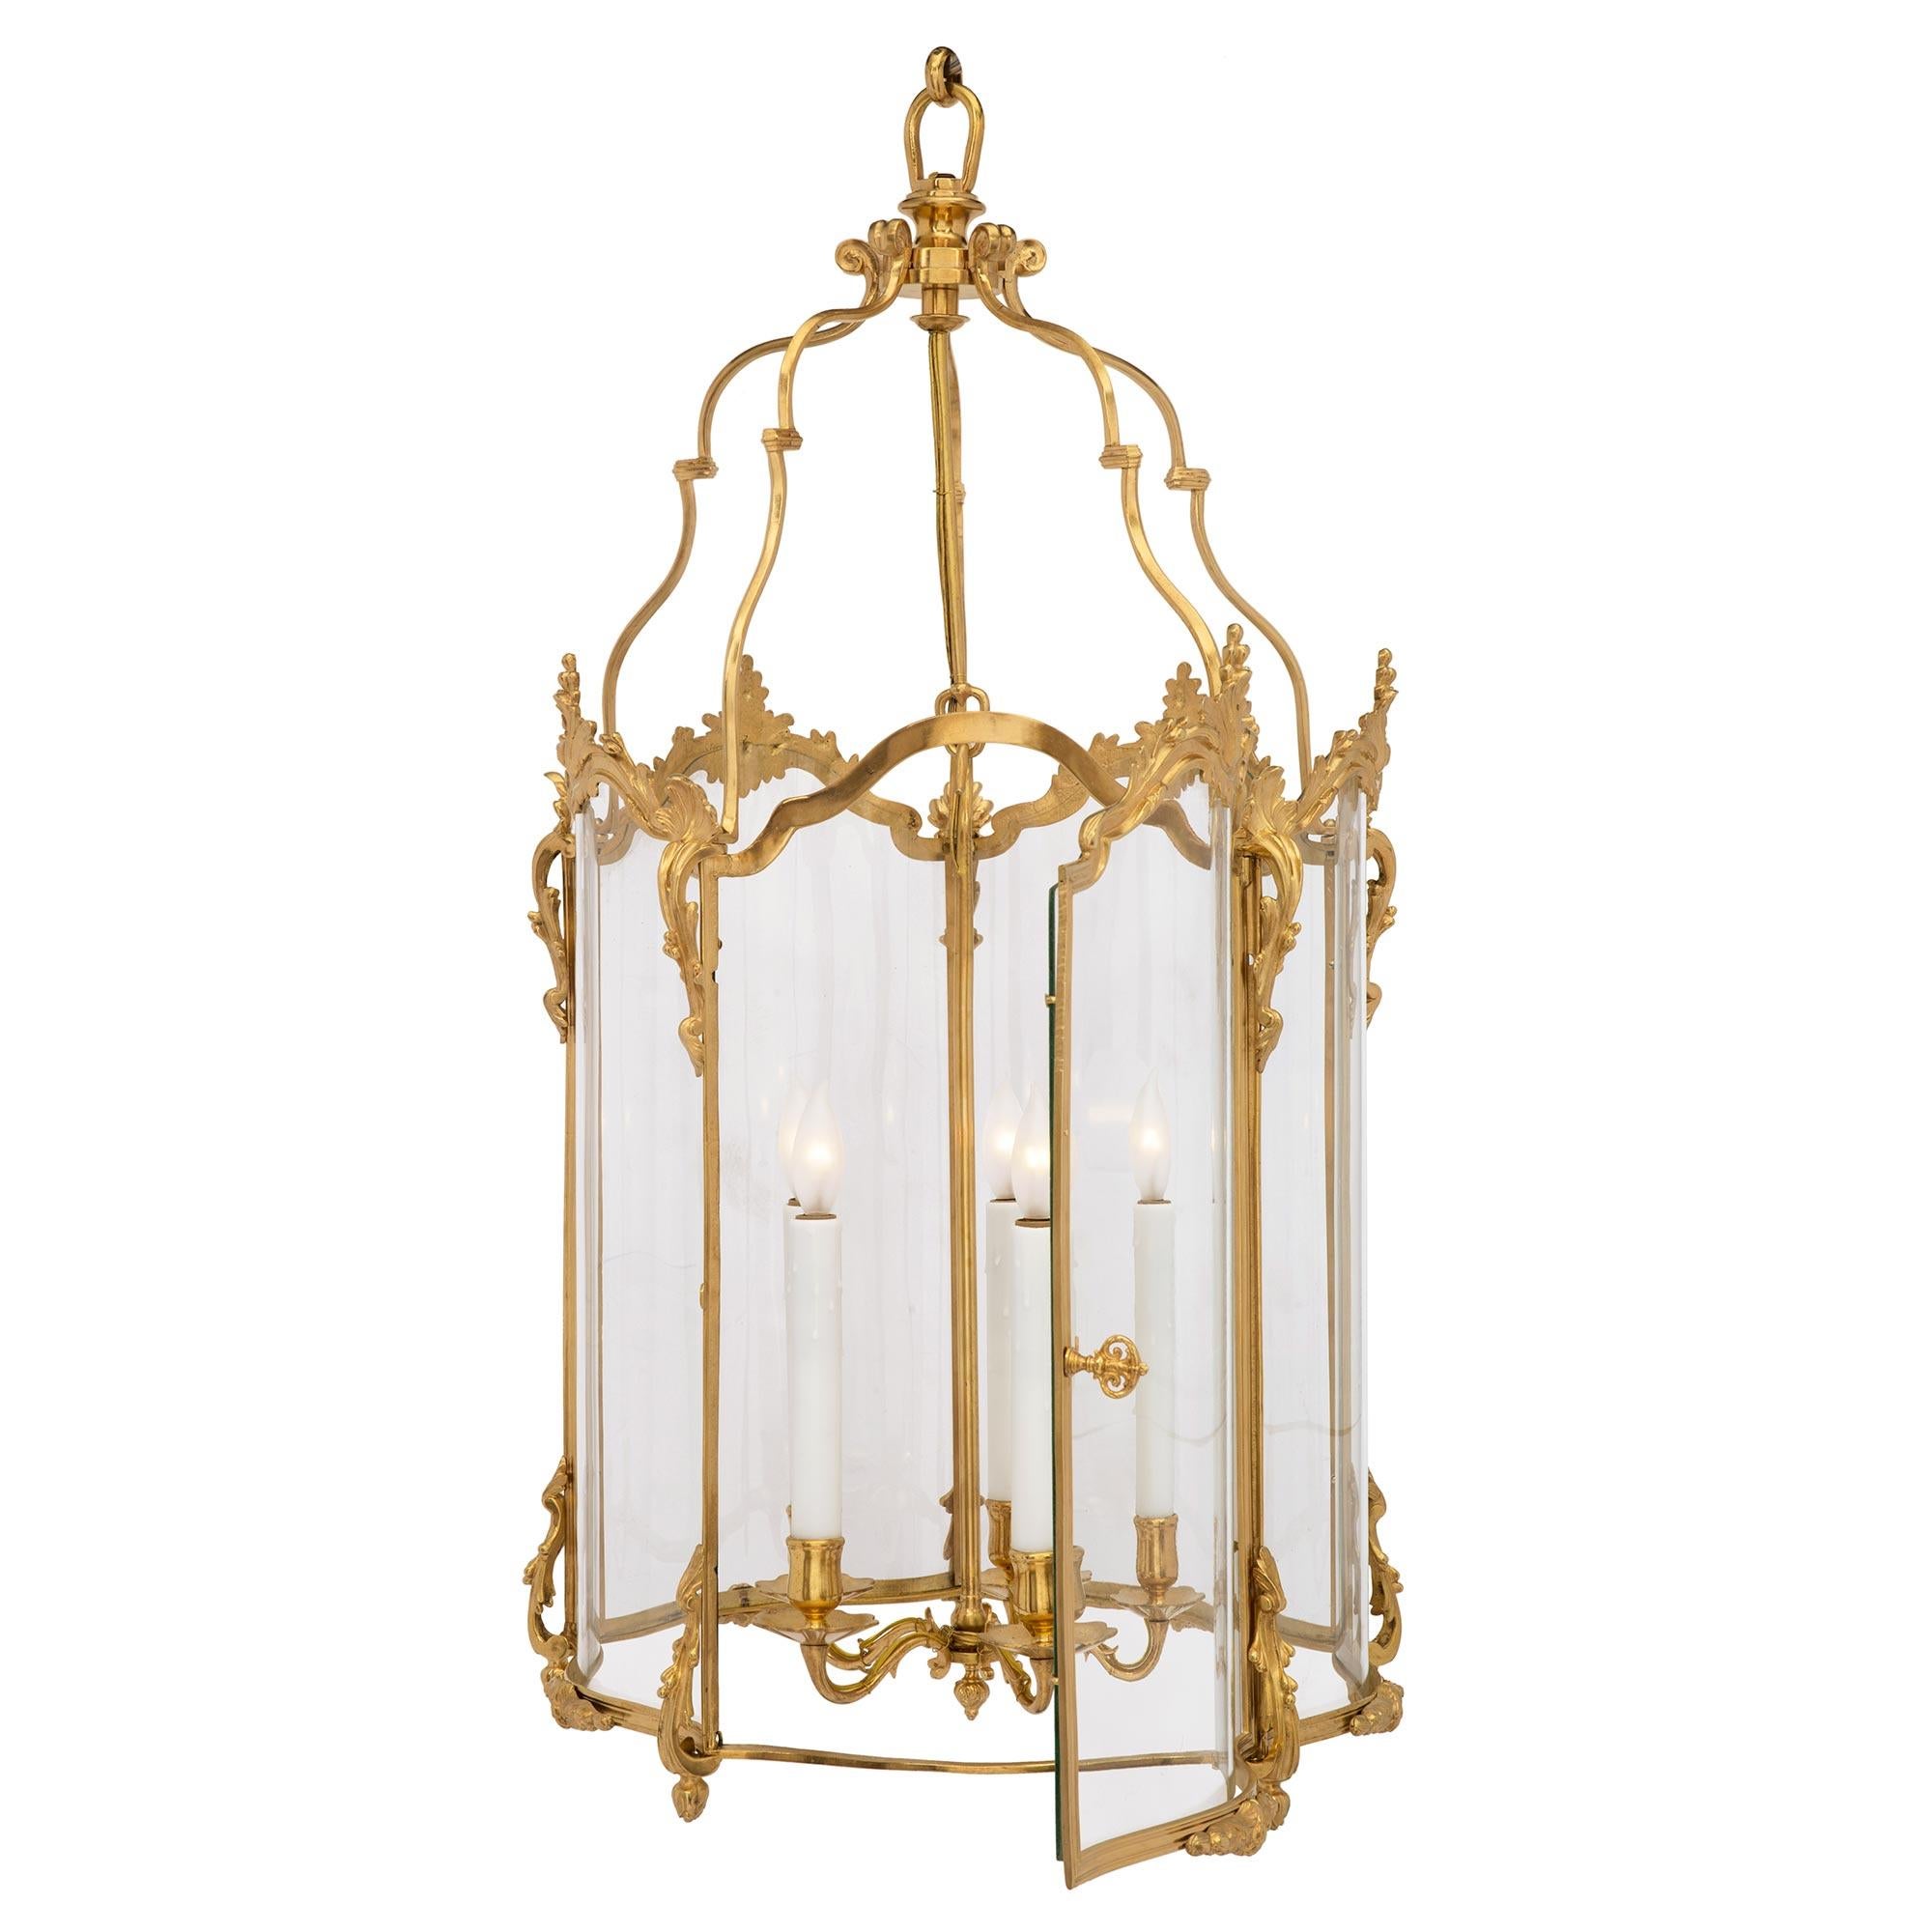 An elegant French 19th century Louis XV st. ormolu and hand blown glass lantern. The lantern is centered by a central hanging electrified ormolu pendant with five candles above candle cups and saucers. At the mottled bottom border are foliate